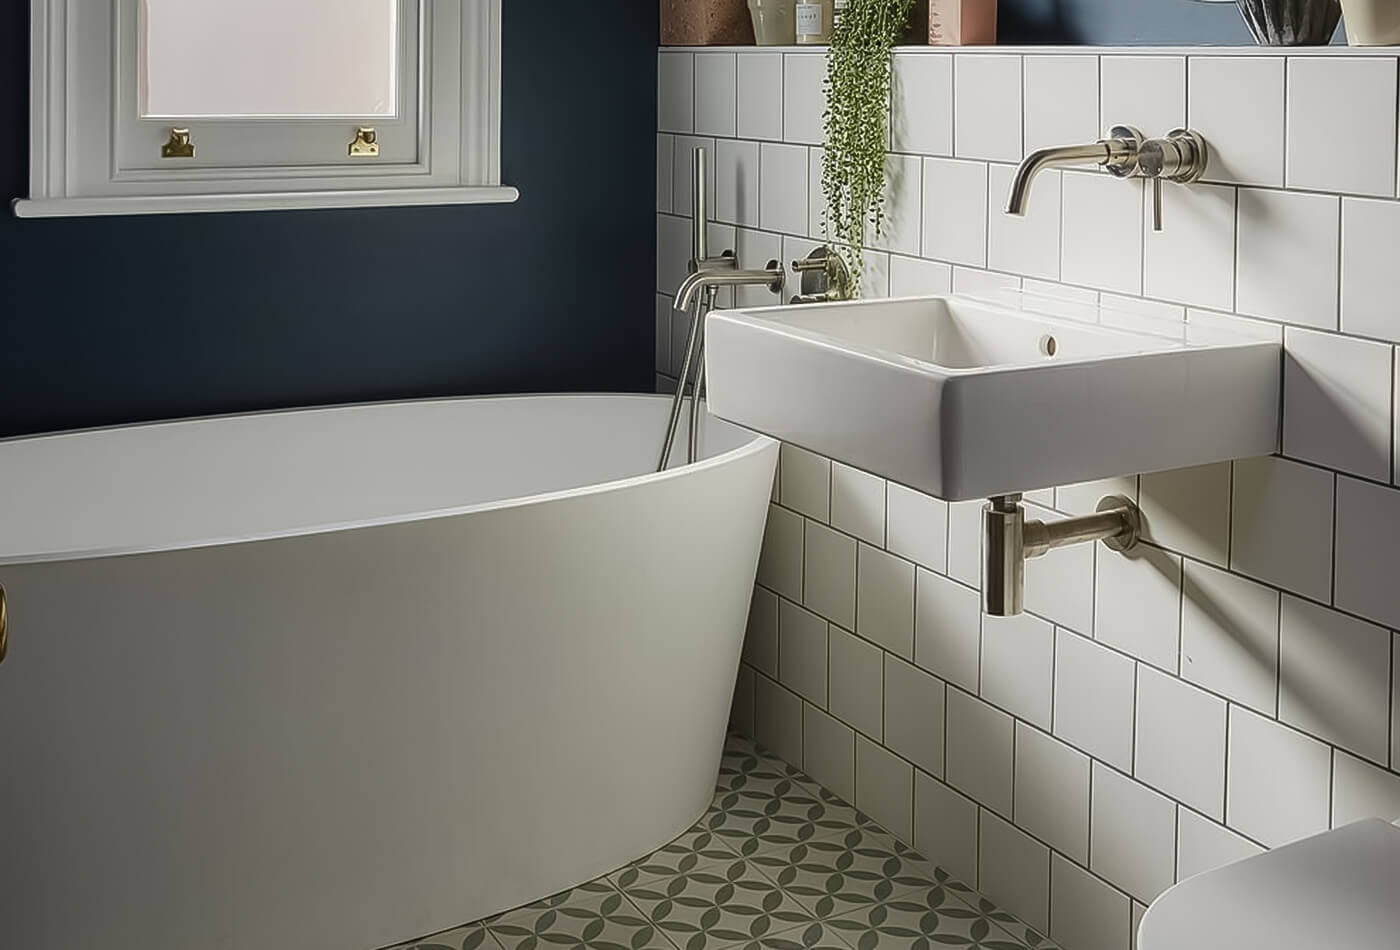 Creating Most Space In Small Bathrooms Using Tiles